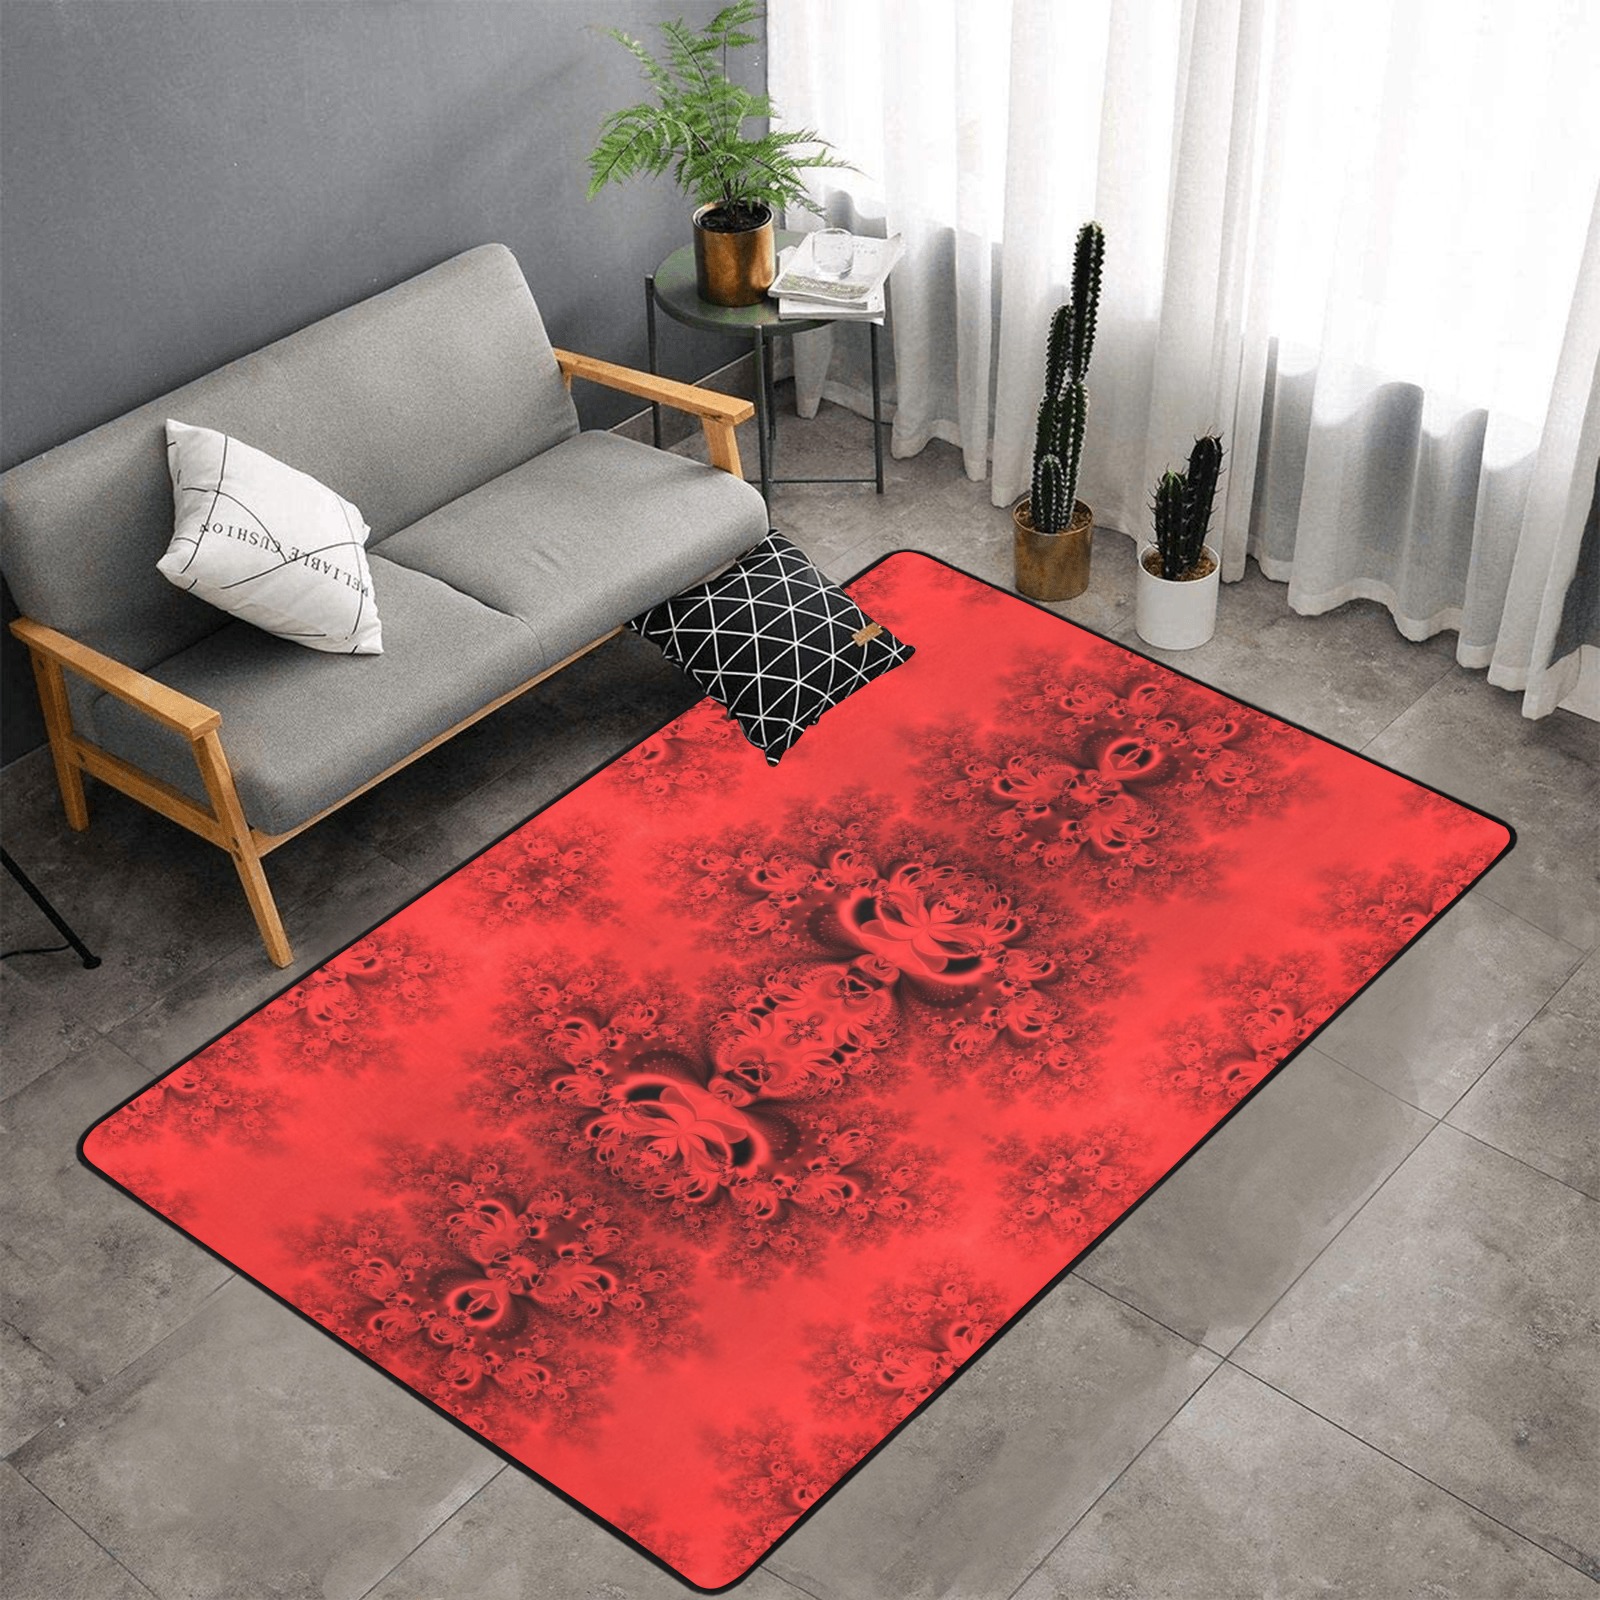 Autumn Reds in the Garden Frost Fractal Area Rug with Black Binding 7'x5'